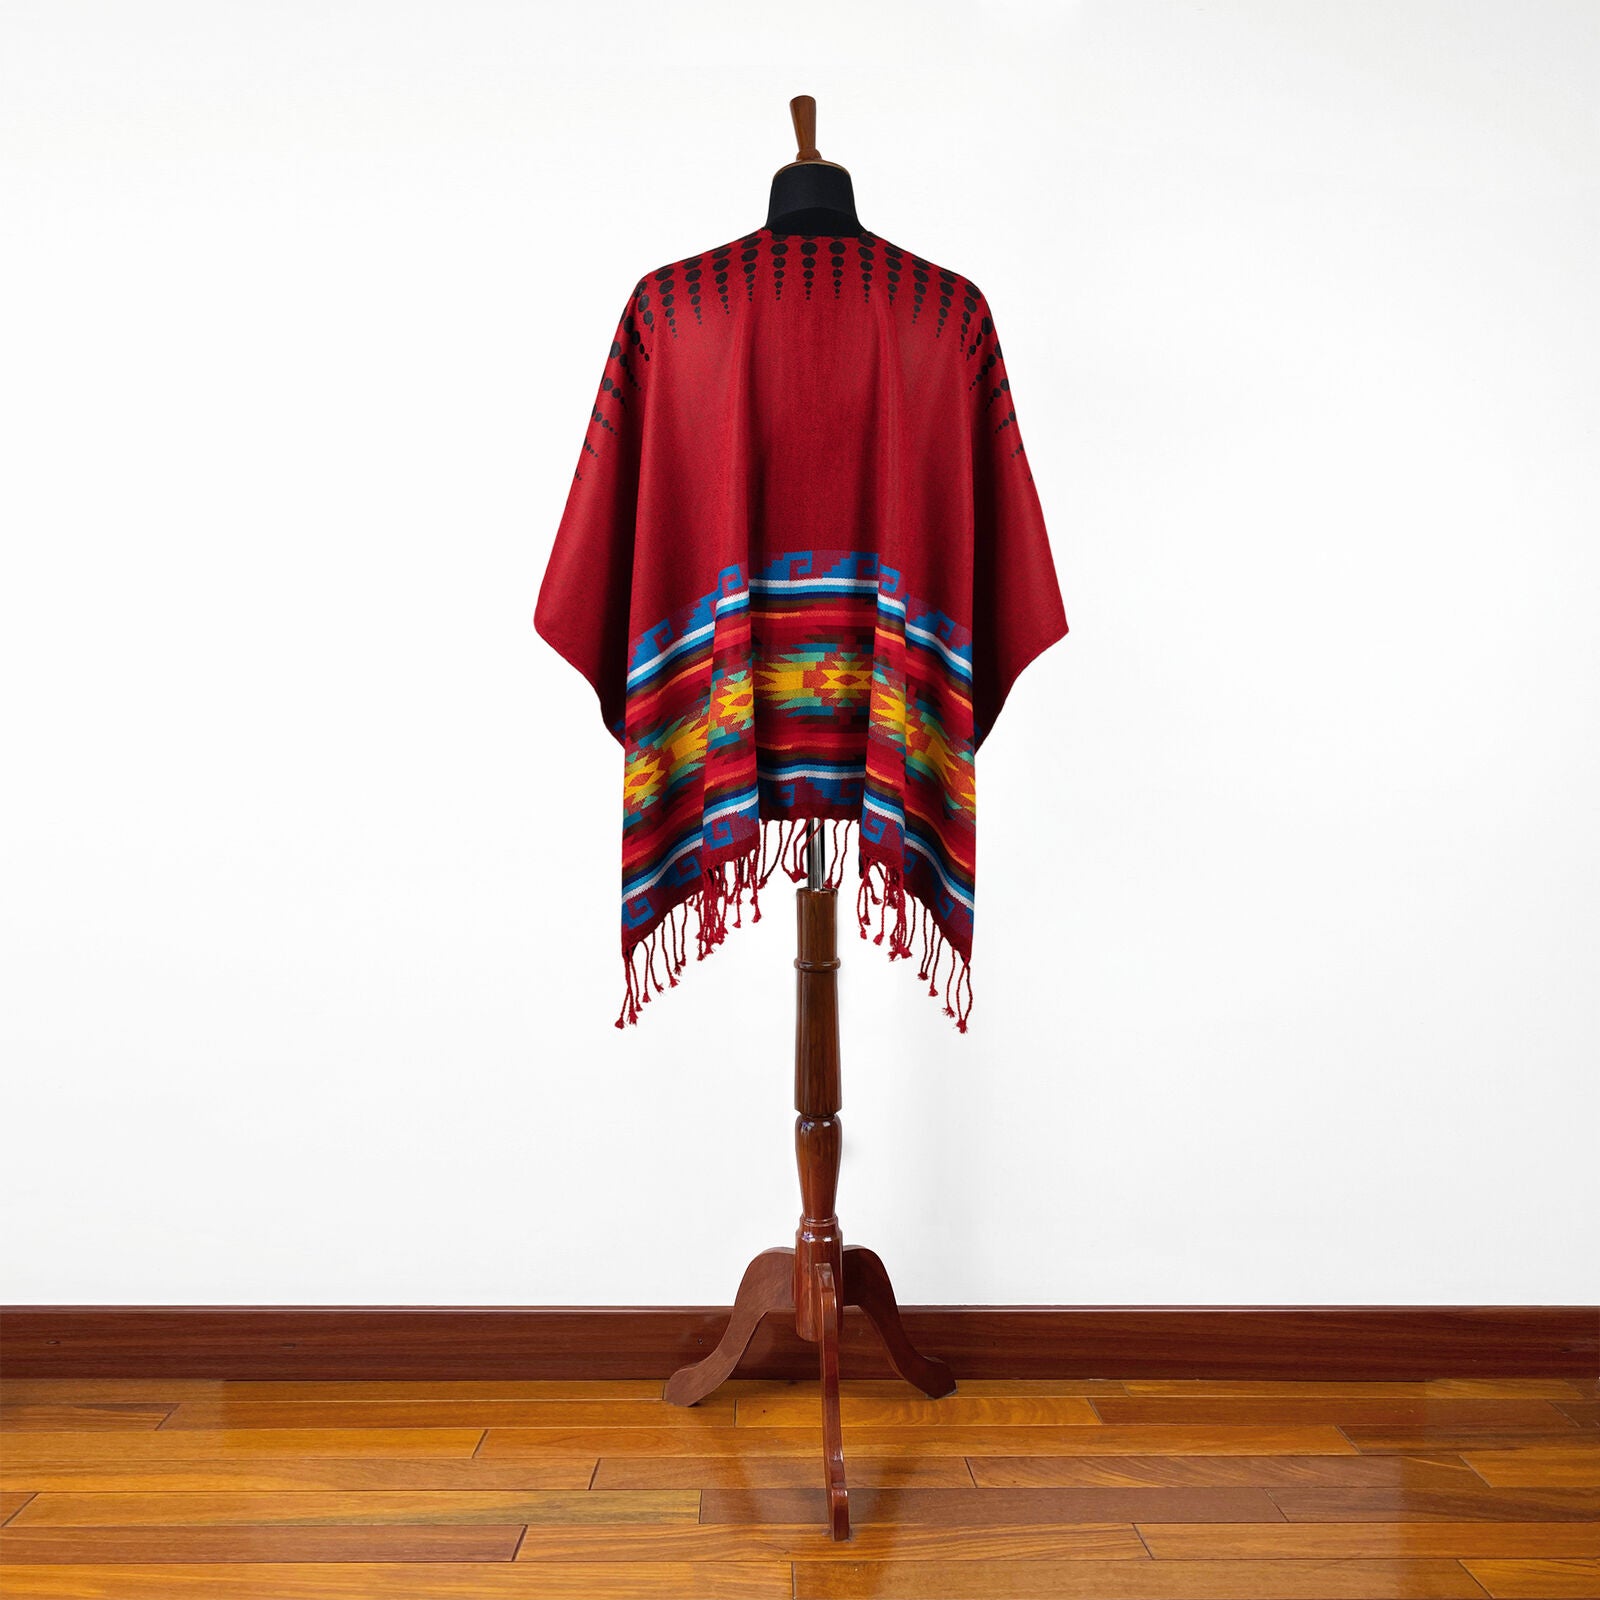 Lightweight Thin Alpaca Wool UNISEX Ruana Cape Poncho/Shawl - Red with authentic pattern